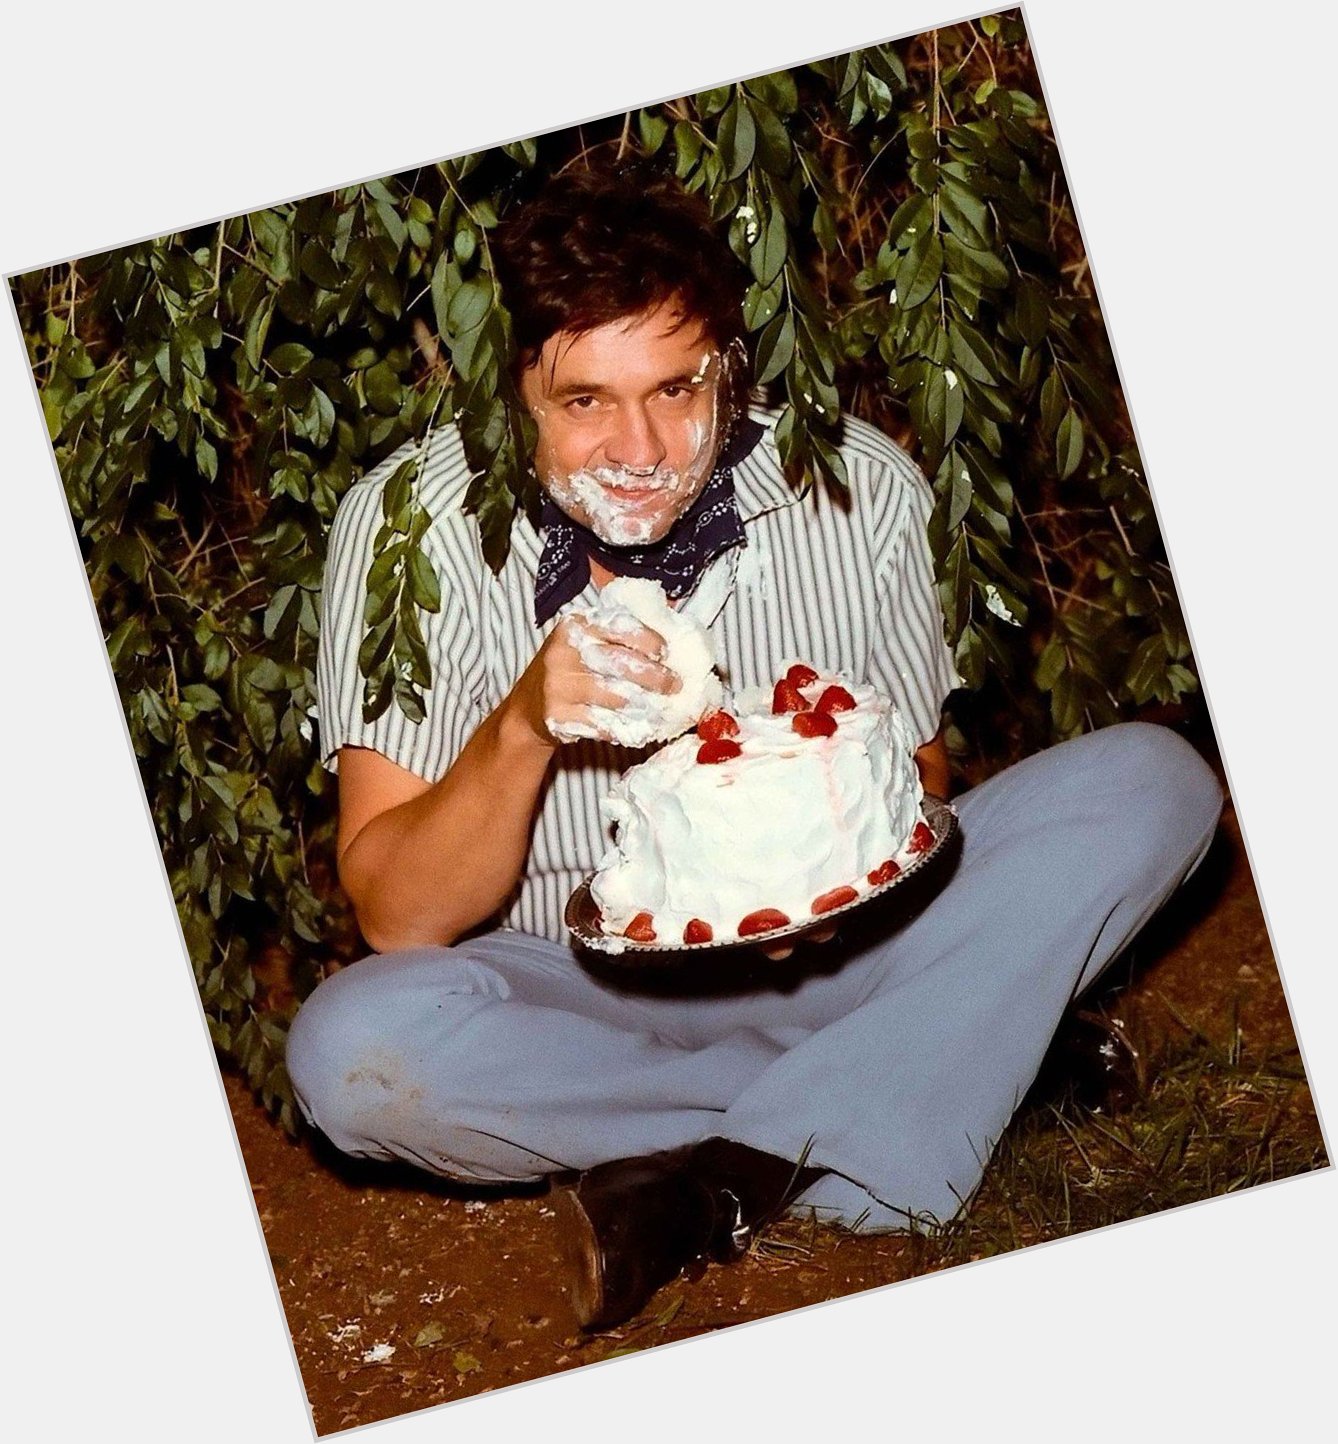 Happy birthday to Johnny Cash and also to this photo of Johnny Cash eating birthday cake on the ground 